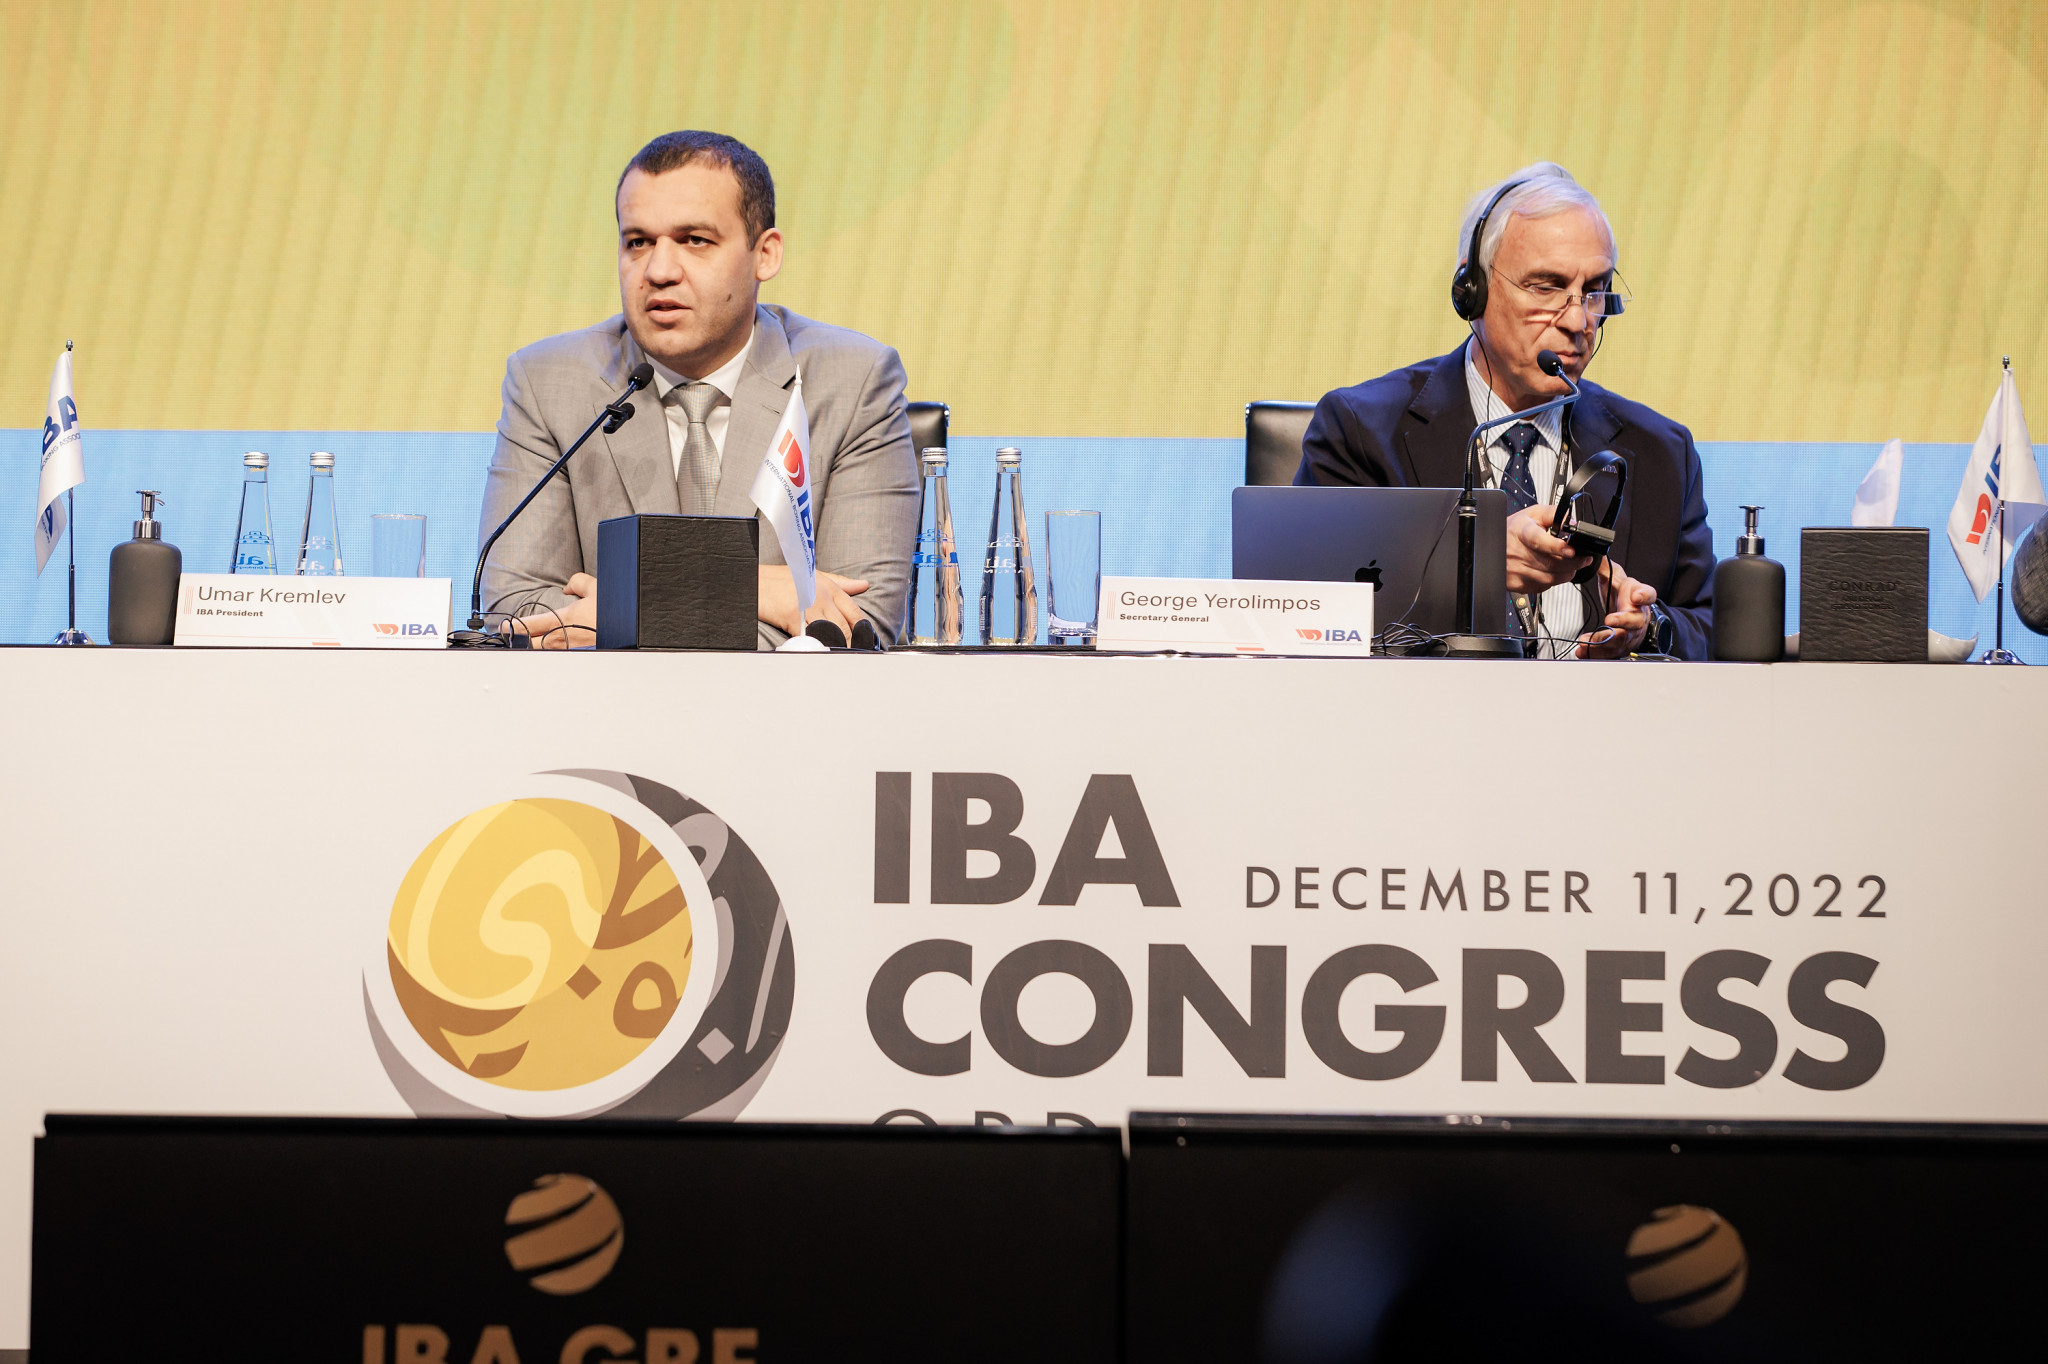 Umar Kremlev asked member federation representatives if they would be happy for the IBA to continue its partnership with Gazprom, resulting in applause from the delegates ©IBA